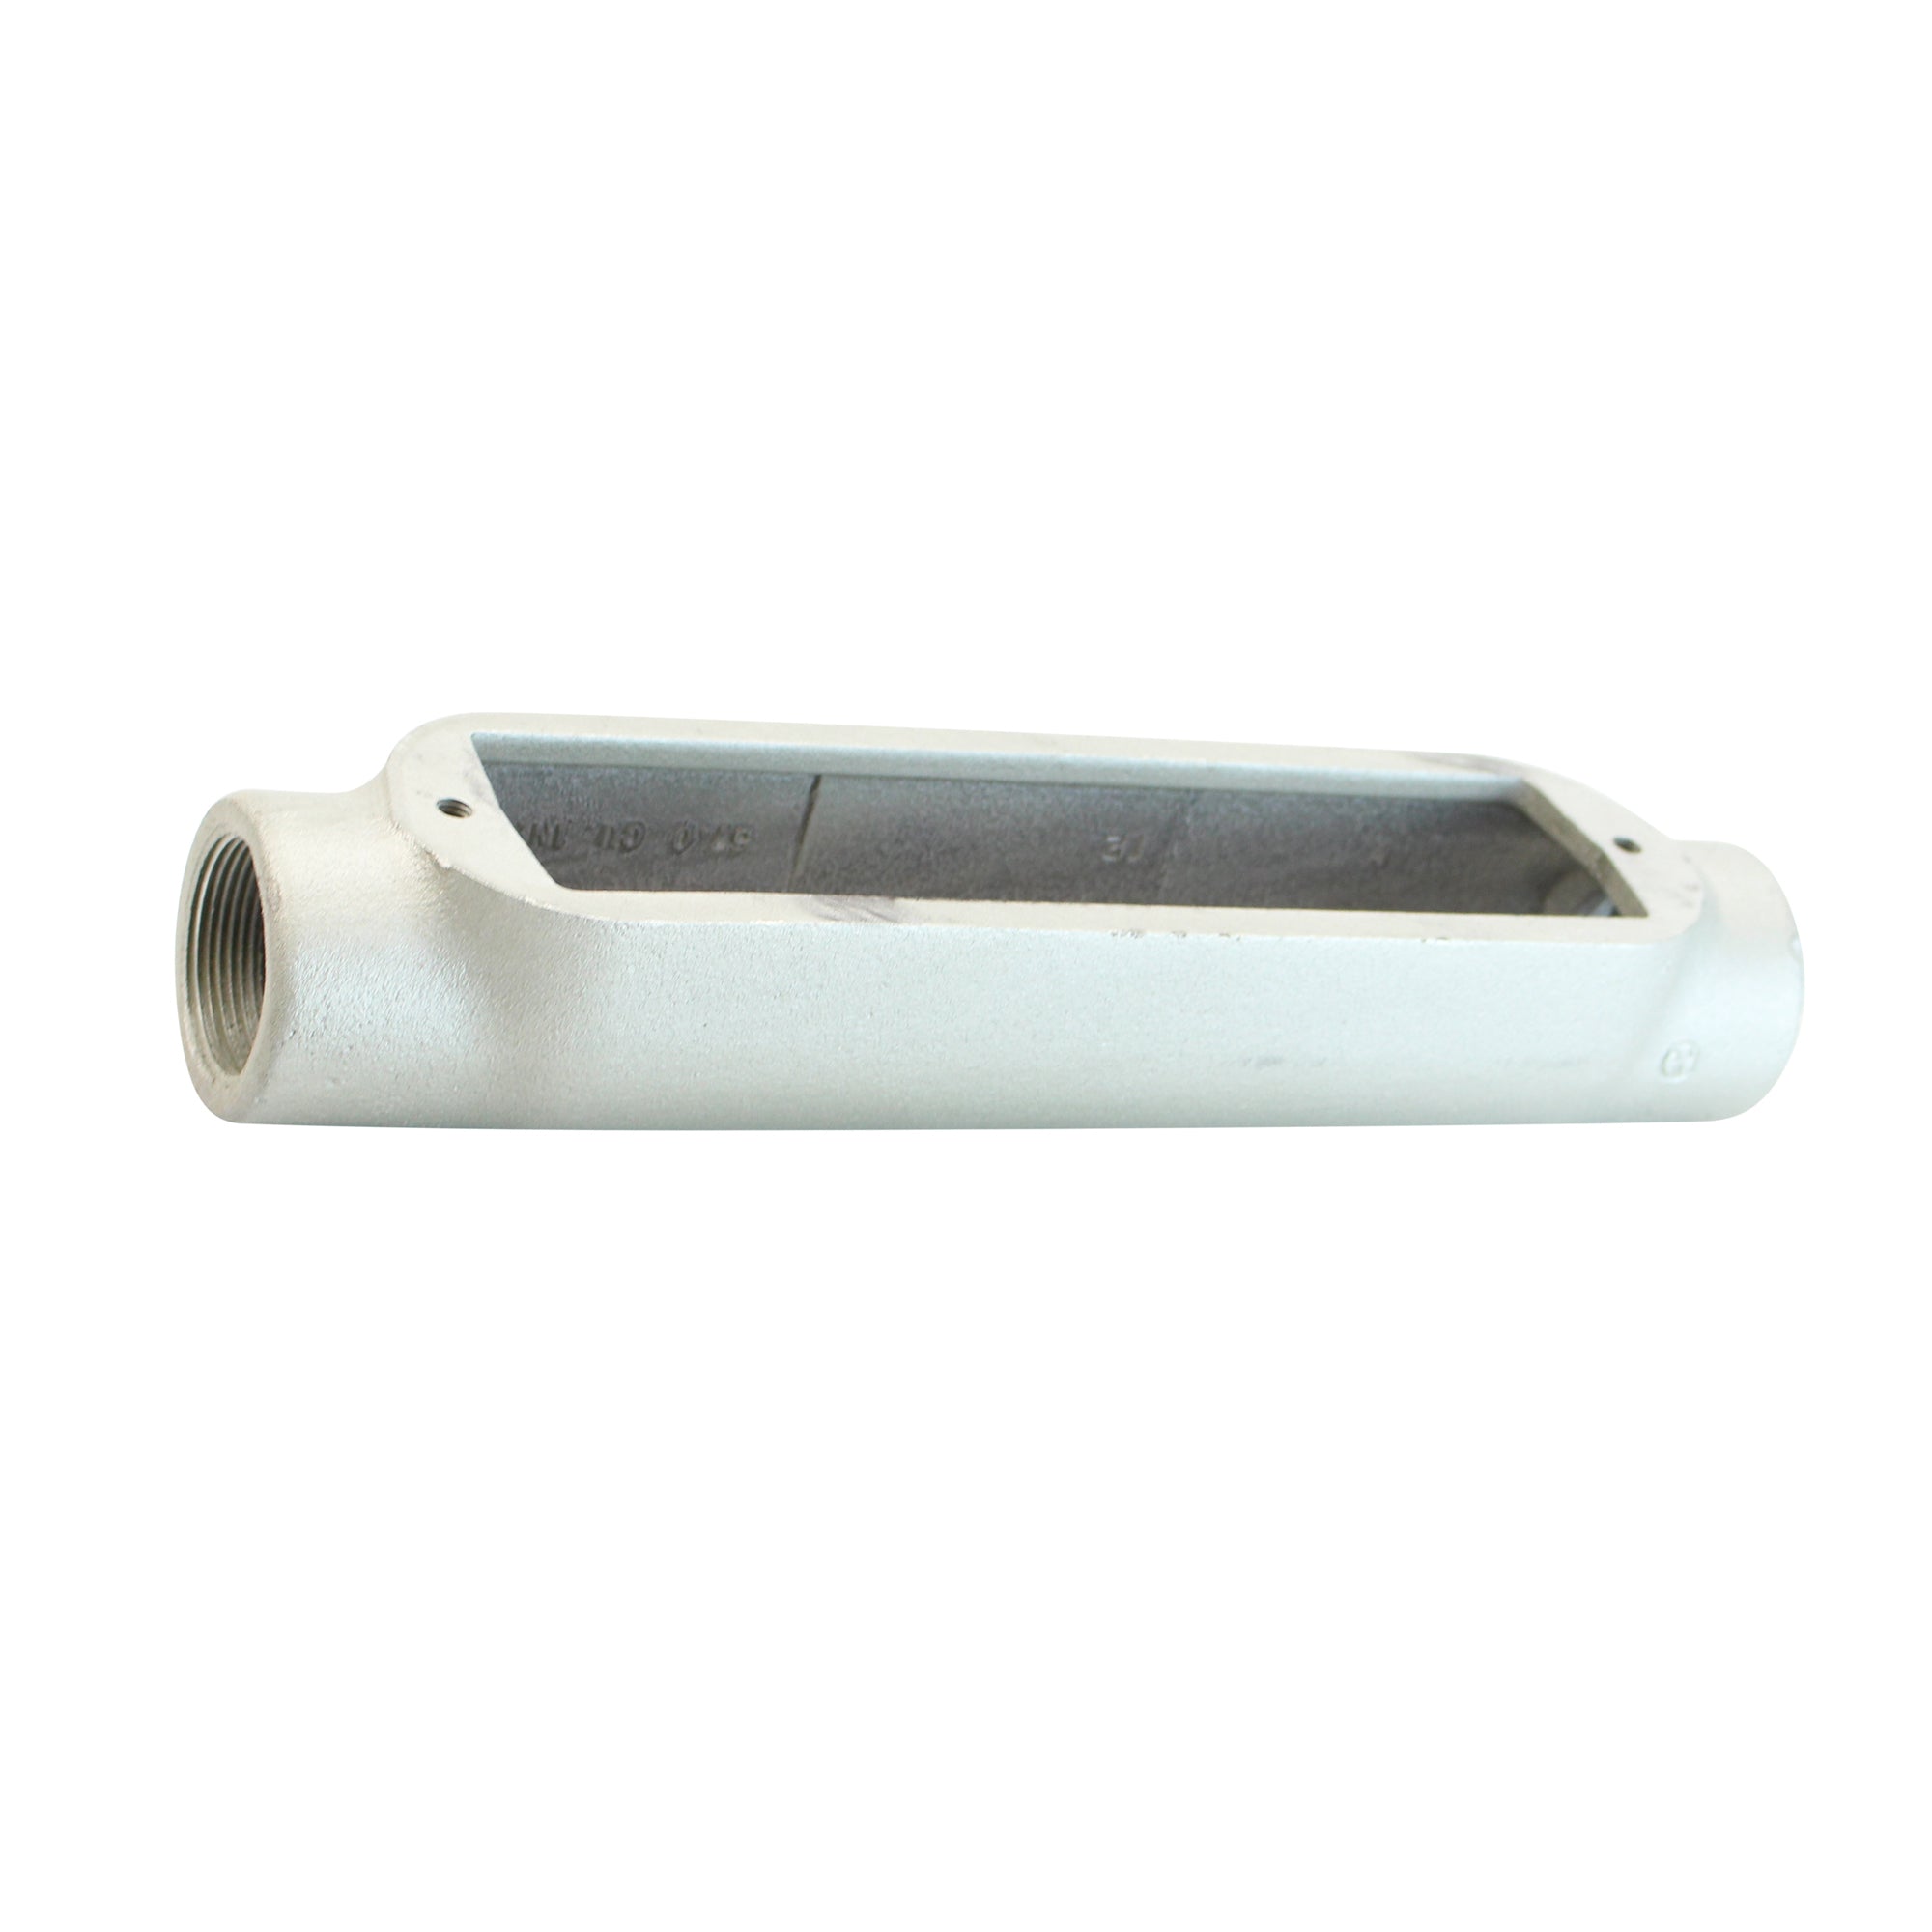 Crouse Hinds, CROUSE-HINDS BC5 CONDULET, CONDUIT OUTLET BODY, 1-1/2", 1.5"